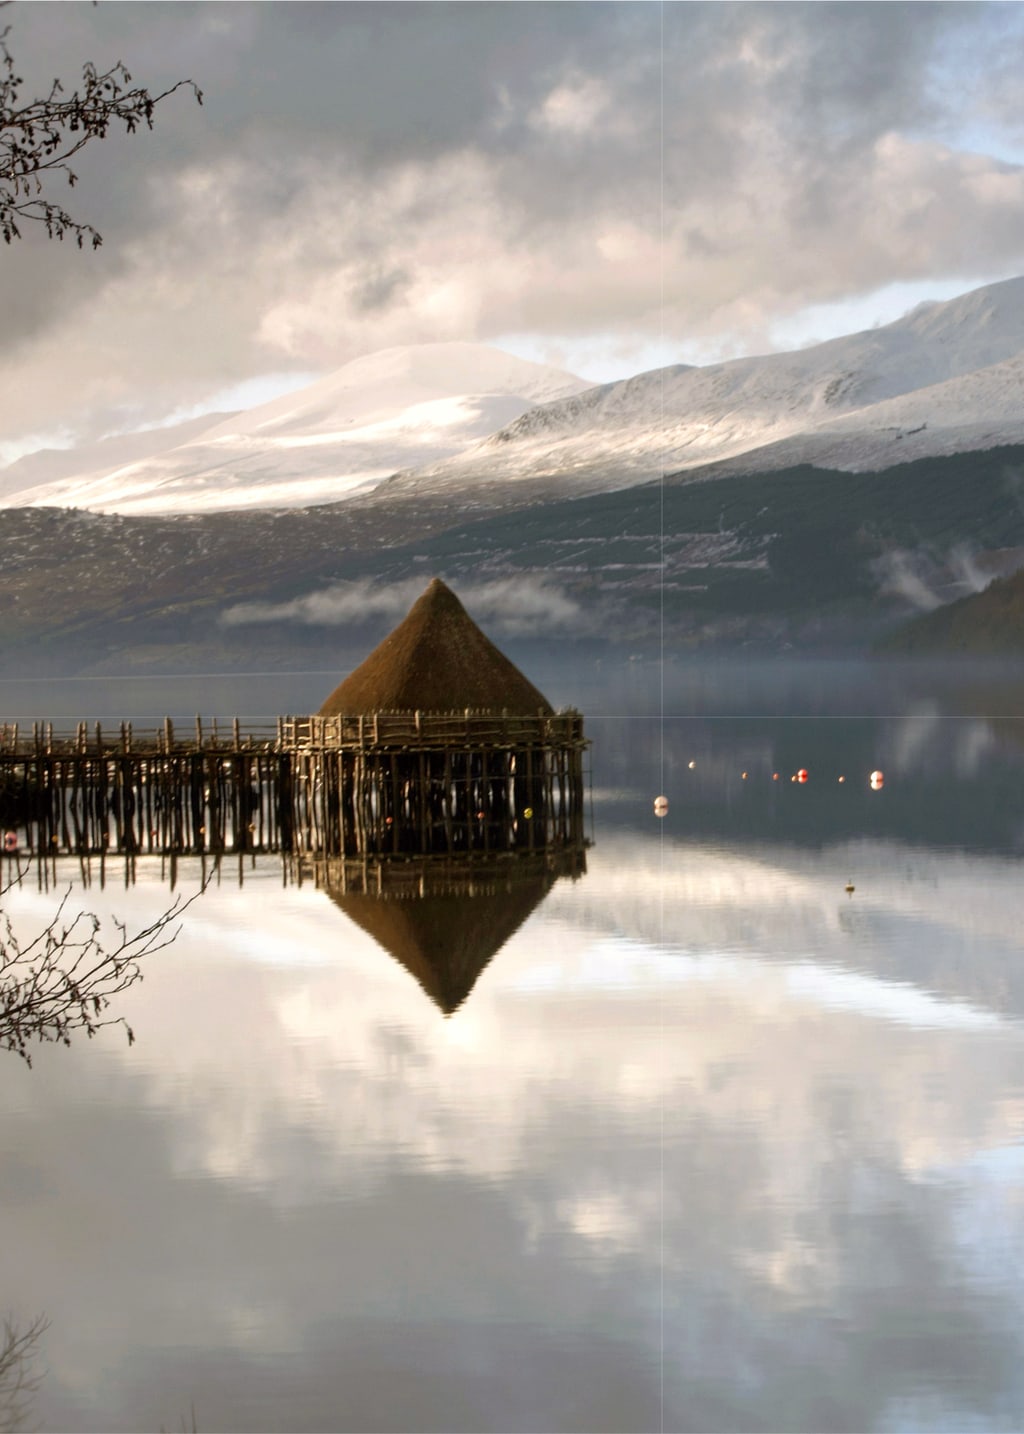 The Crannog in Loch Tay, a peaceful stop on the Heart 200 Scottish road trip